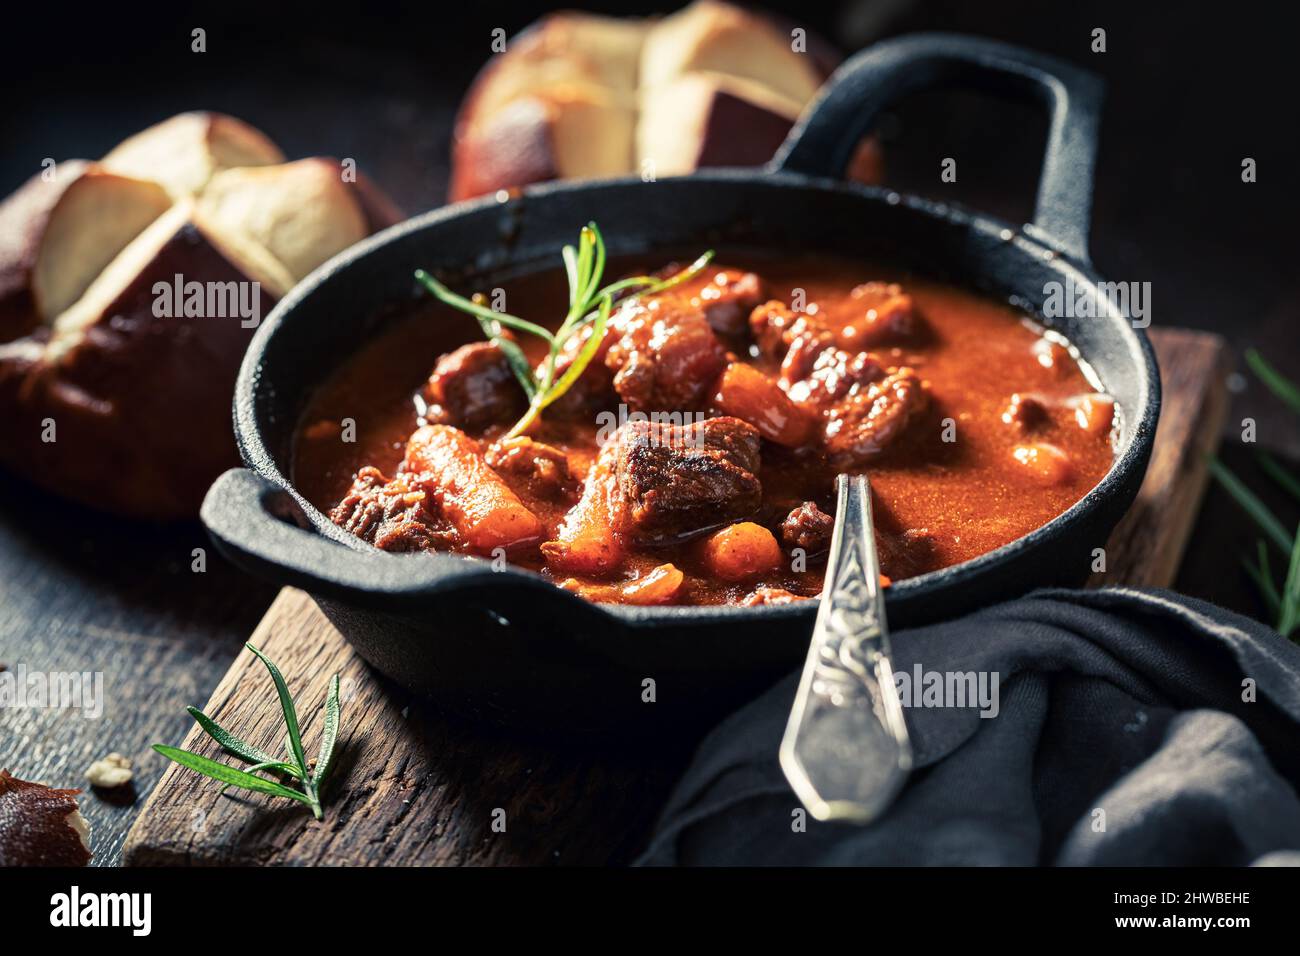 Hot and tasty goulash served with fresh hot buns on dark plate Stock Photo